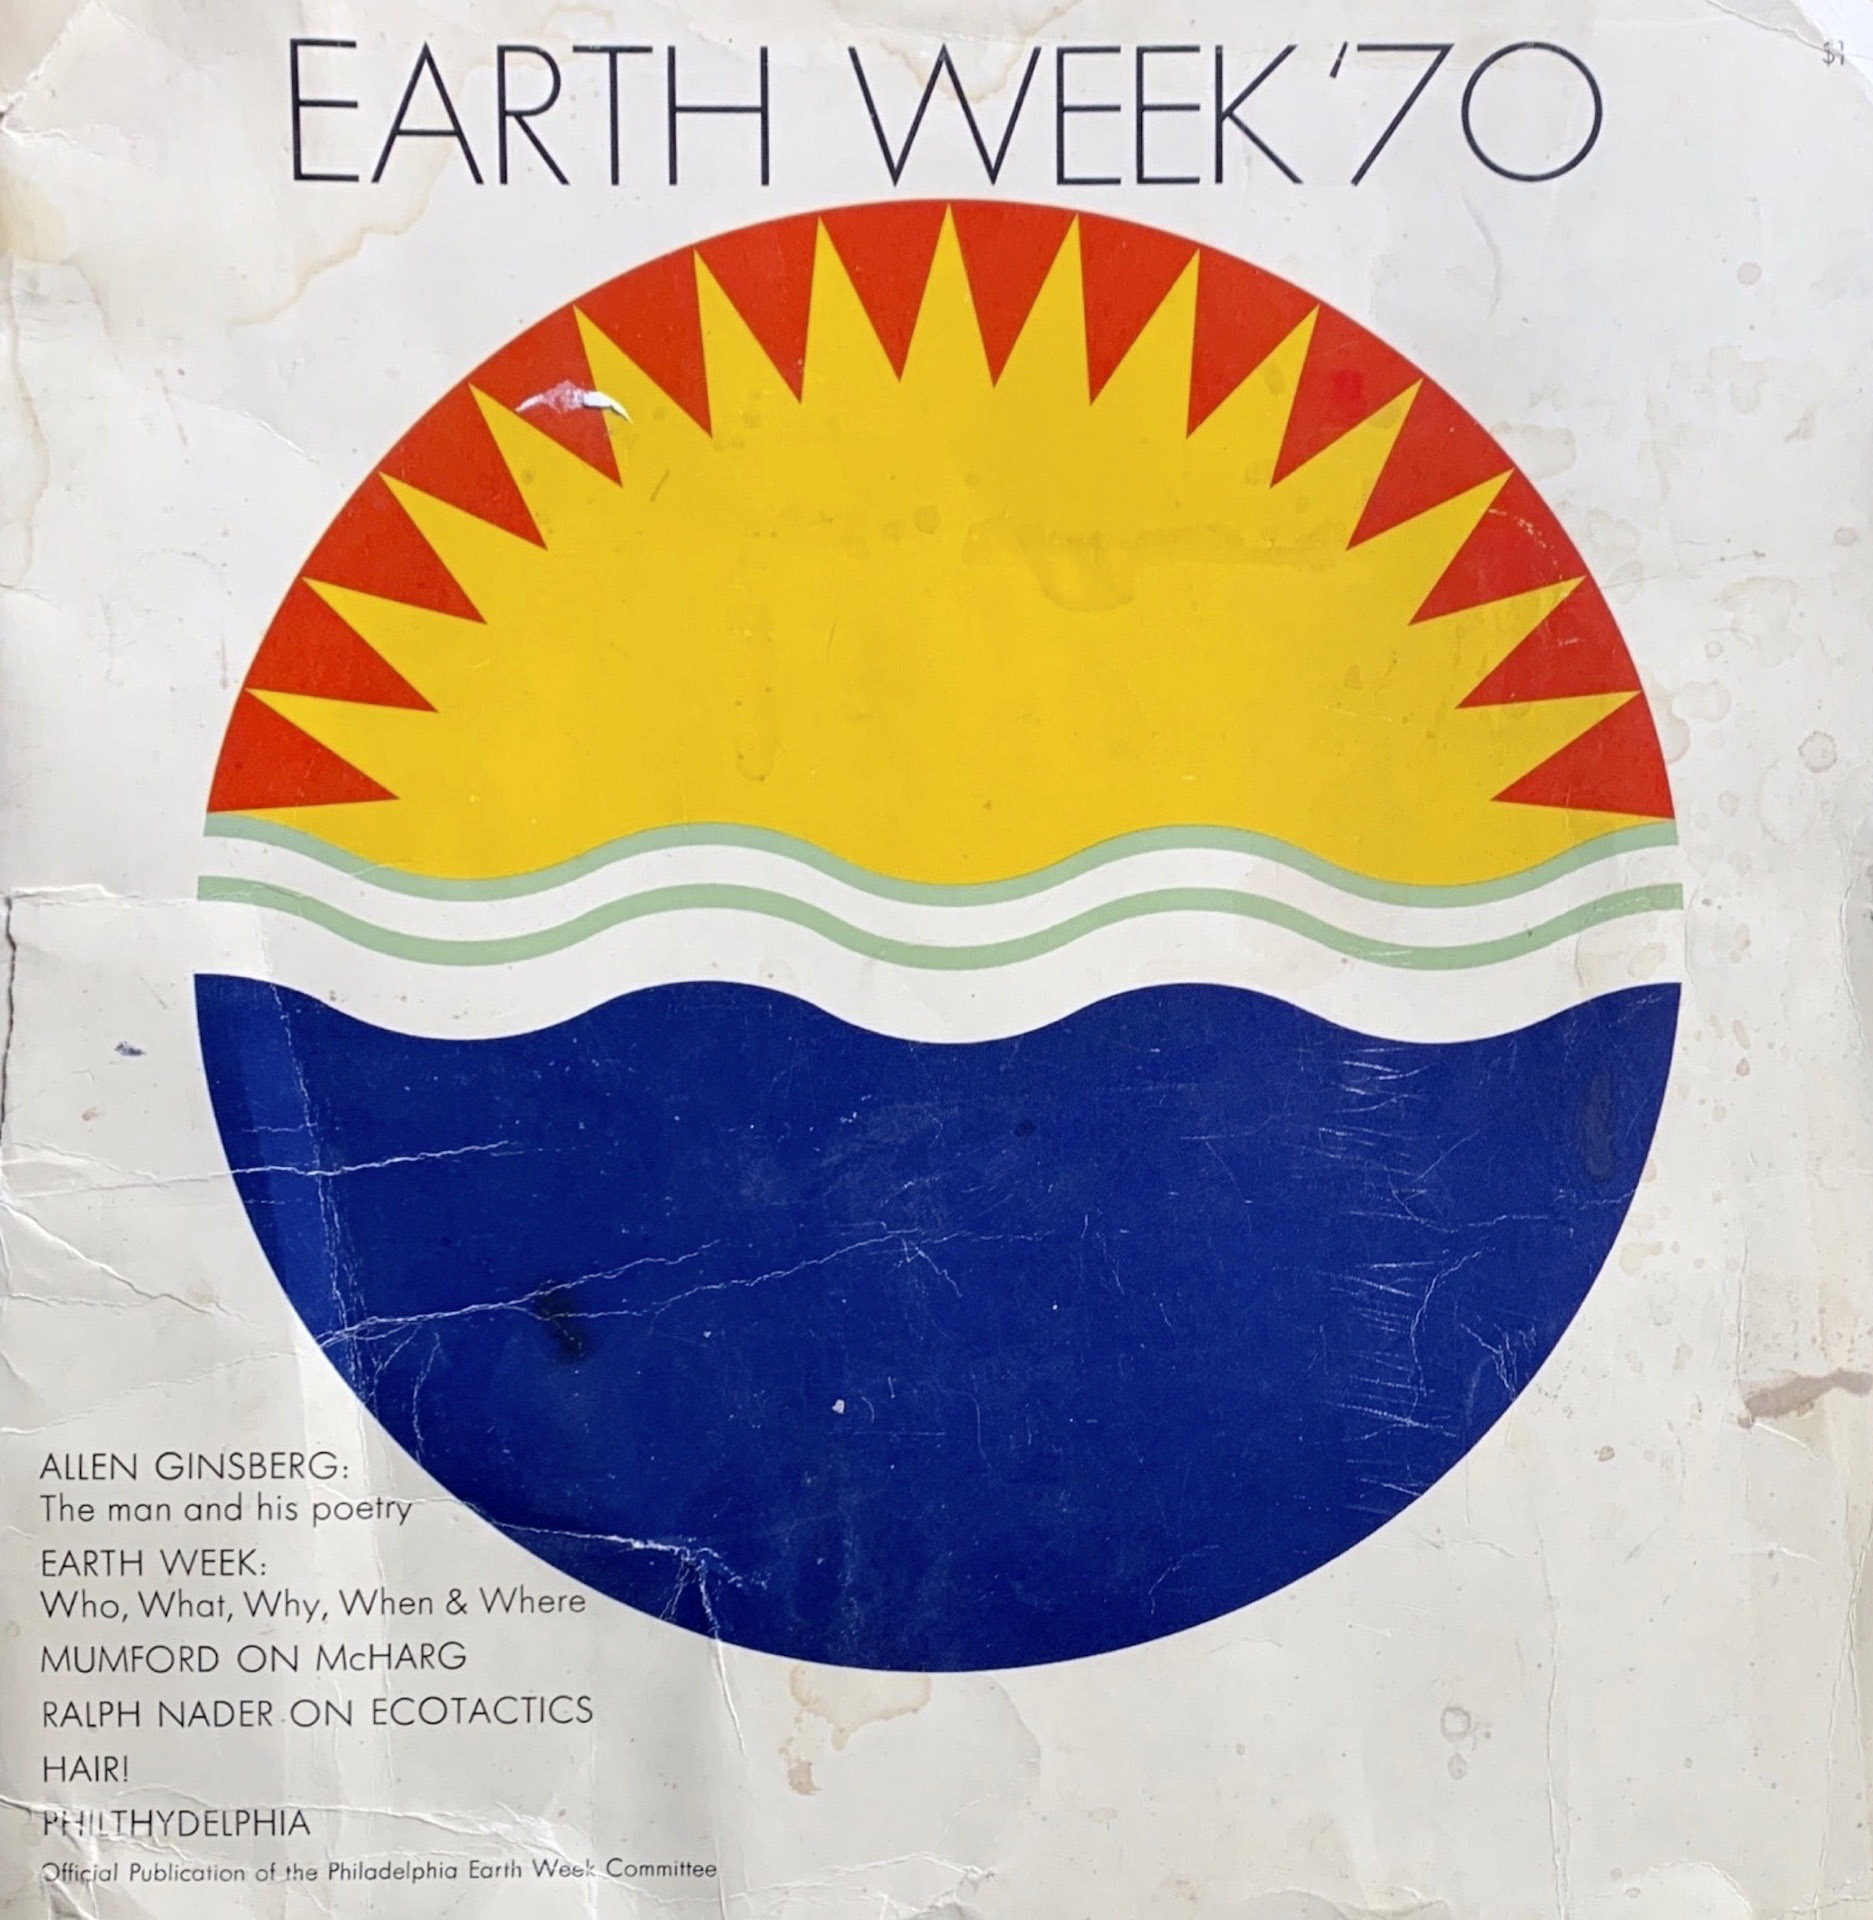 Cover illustrationa and text of Earth week '70 publication